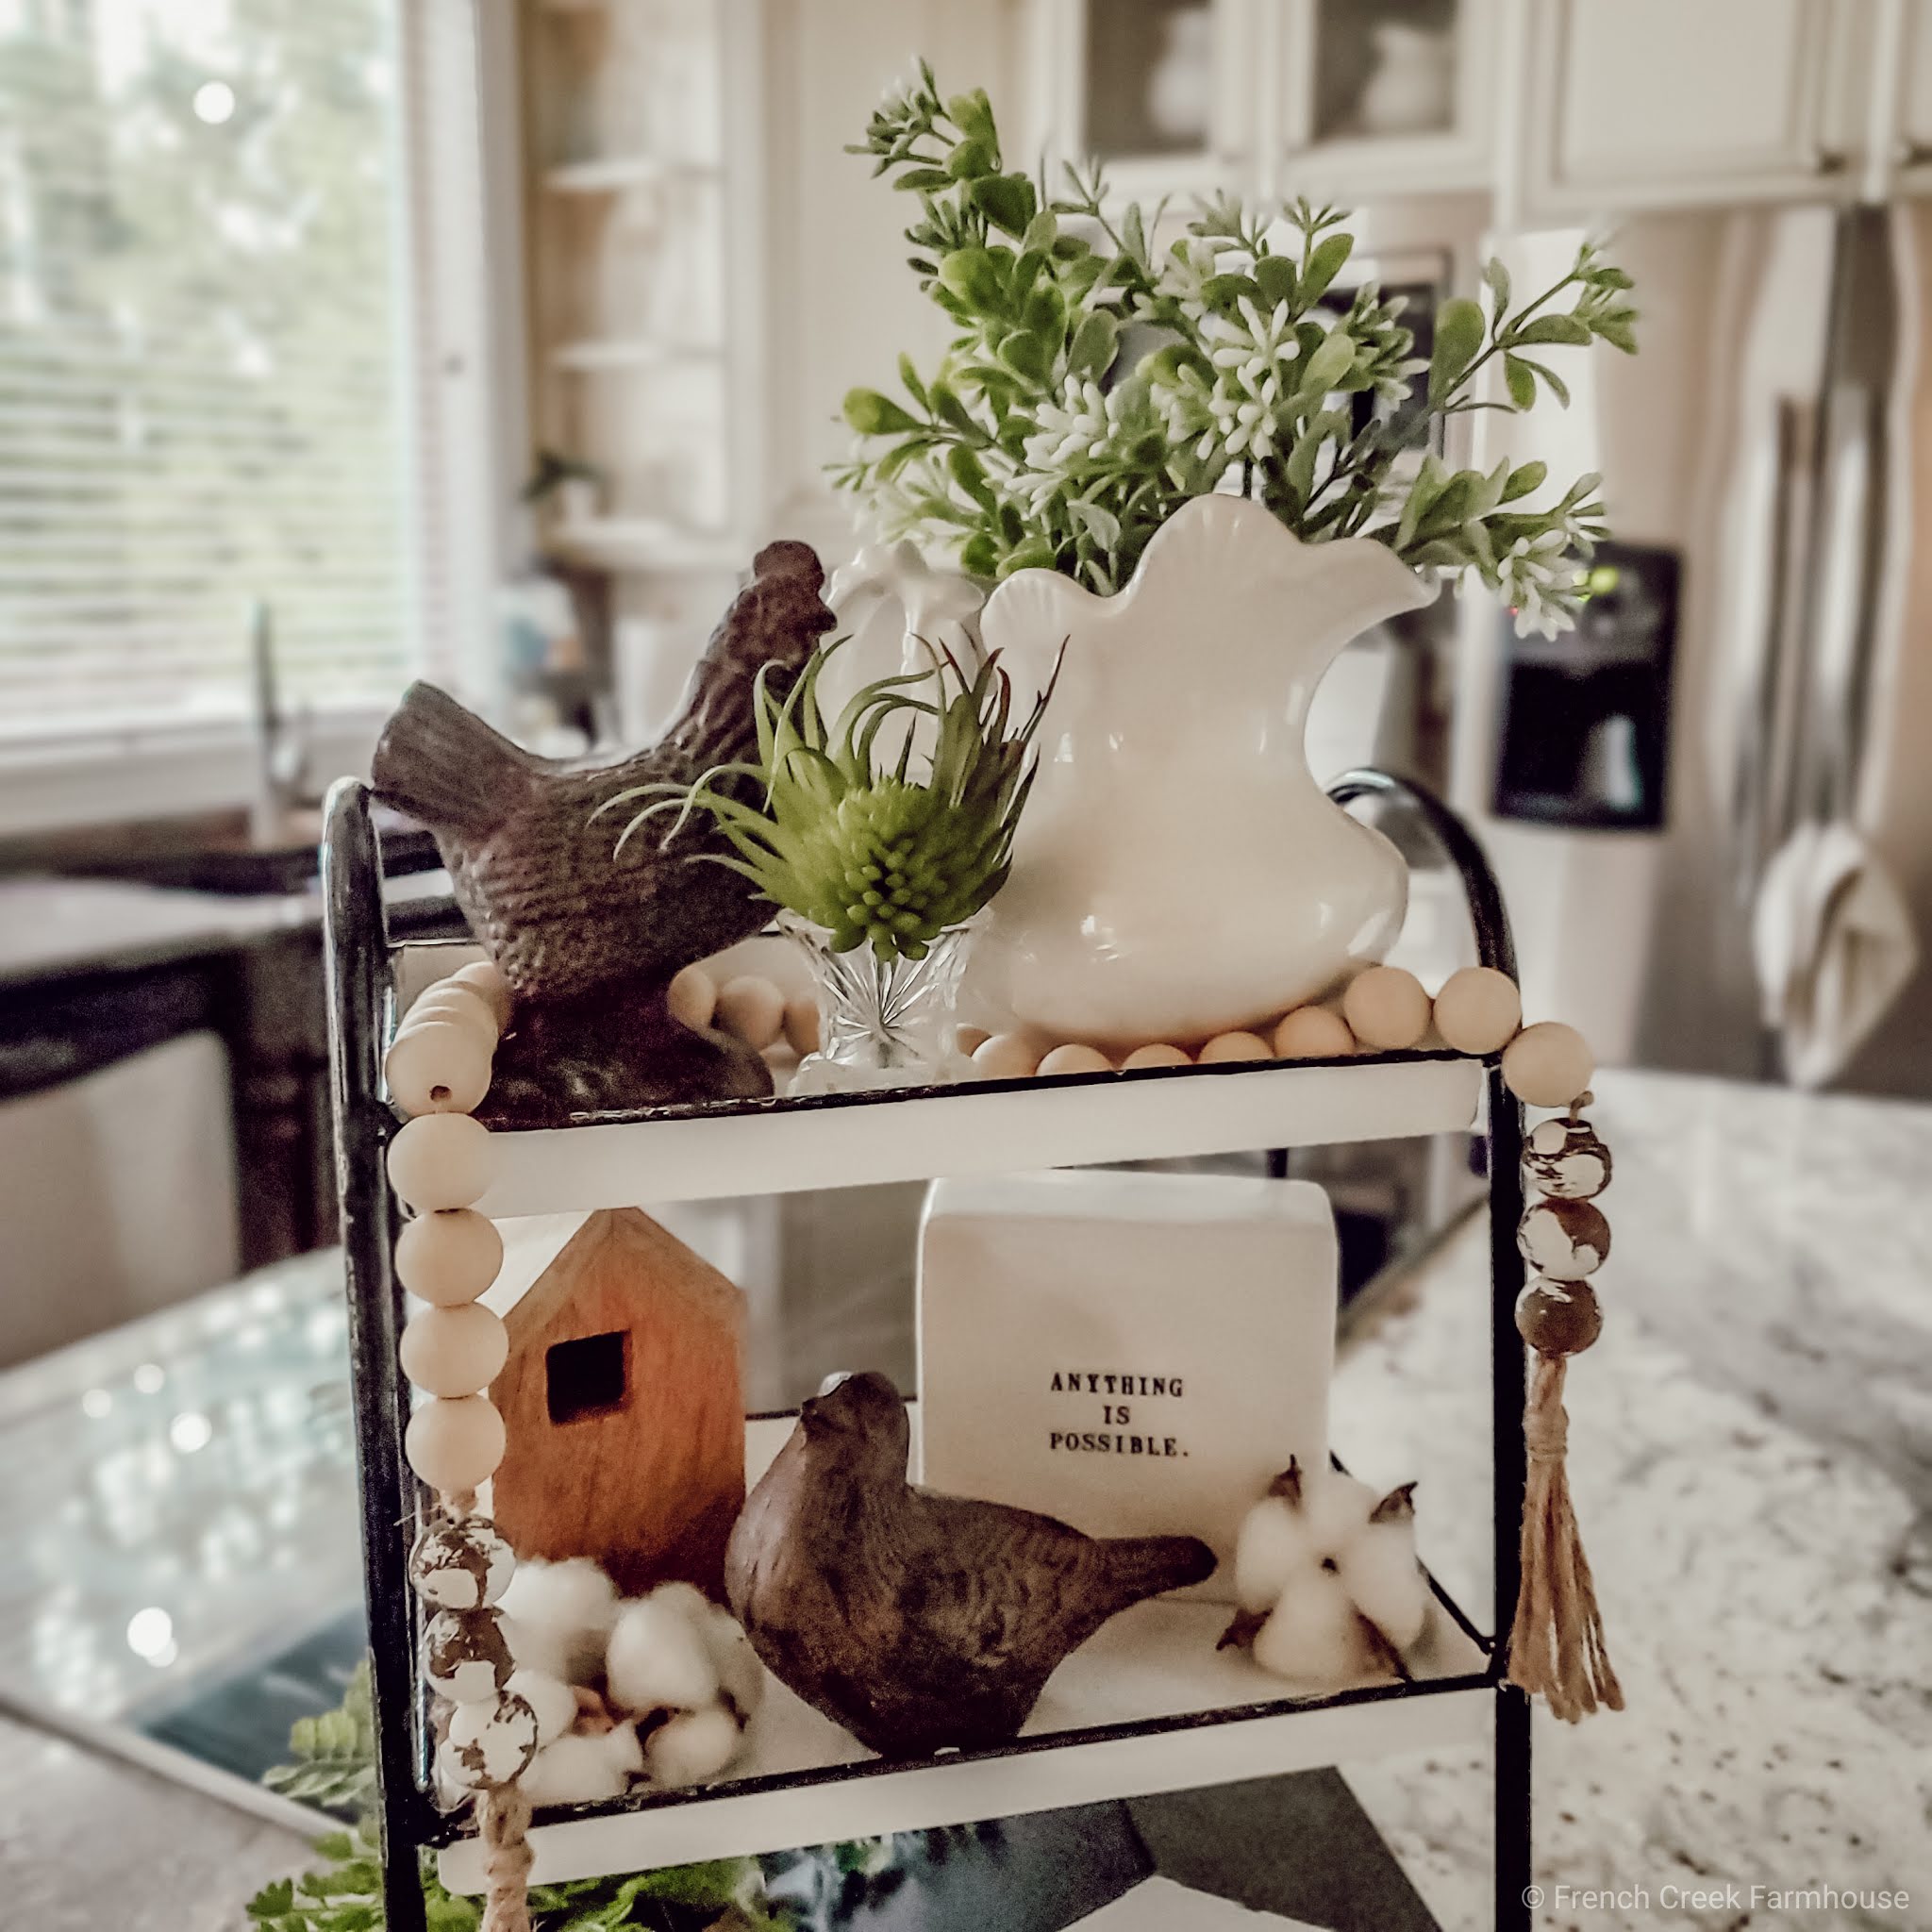 Tiered tray with birds and Rae Dunn decor